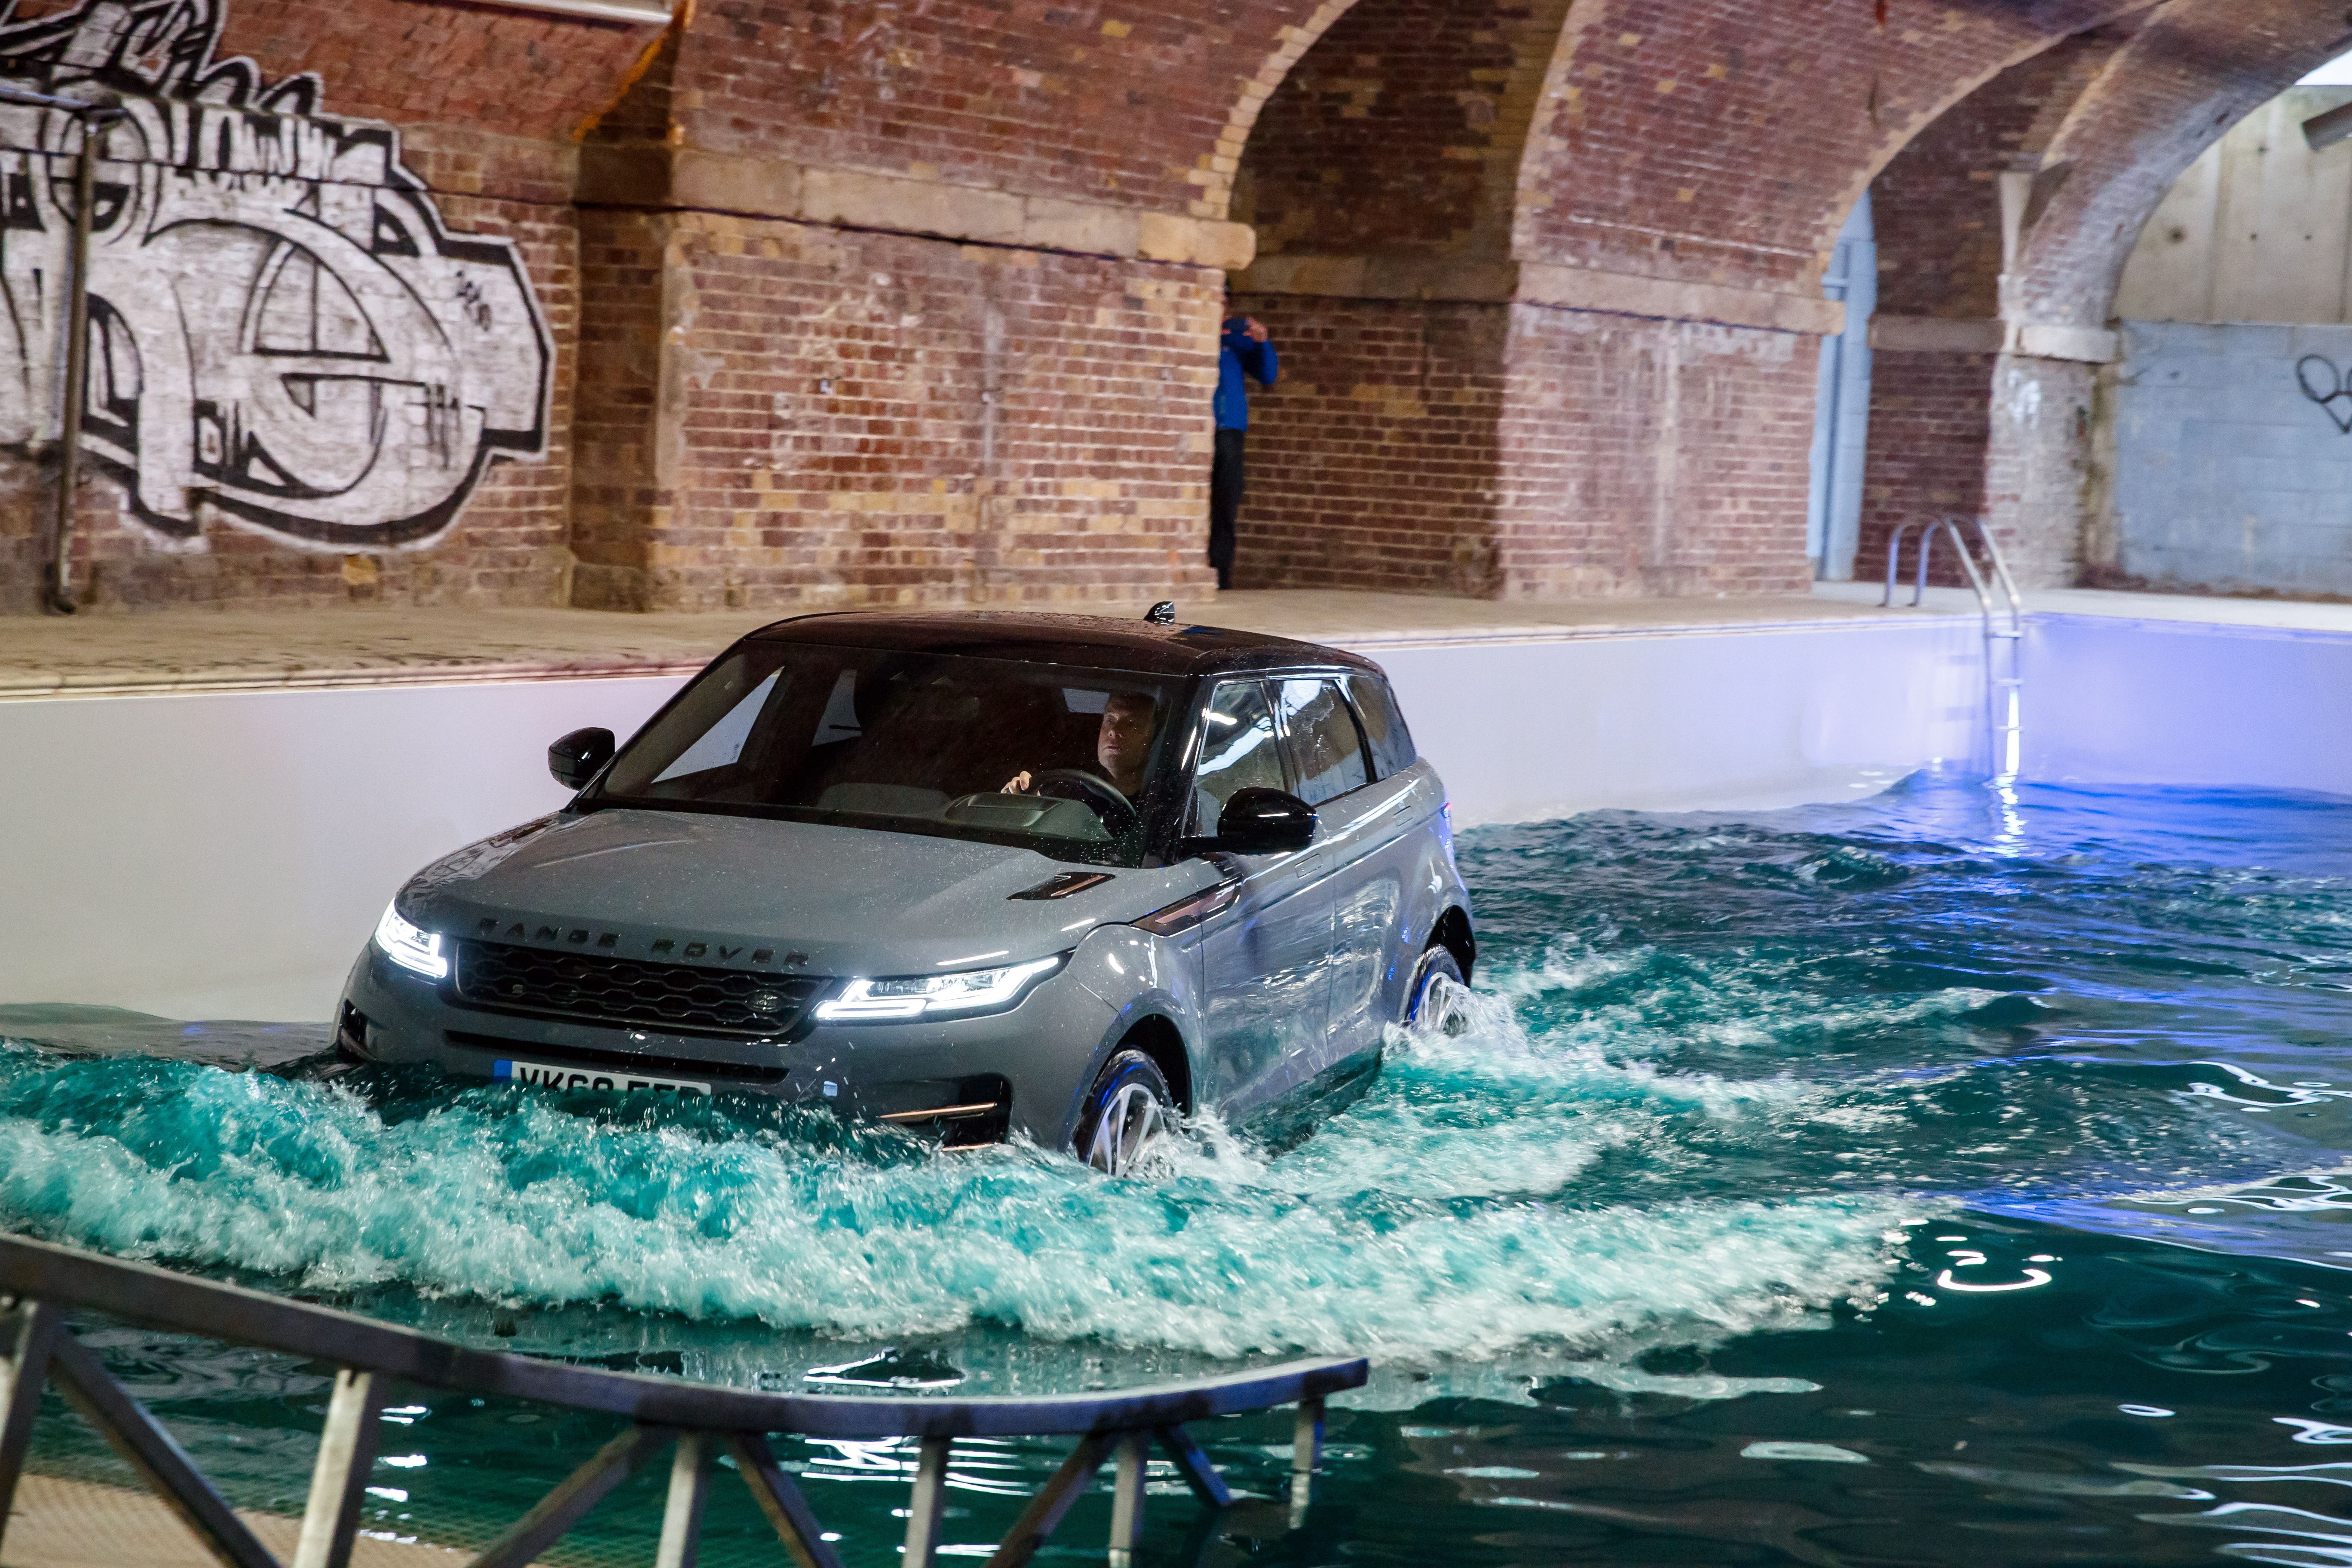 The Evoque can cope with water of 60cm depth.